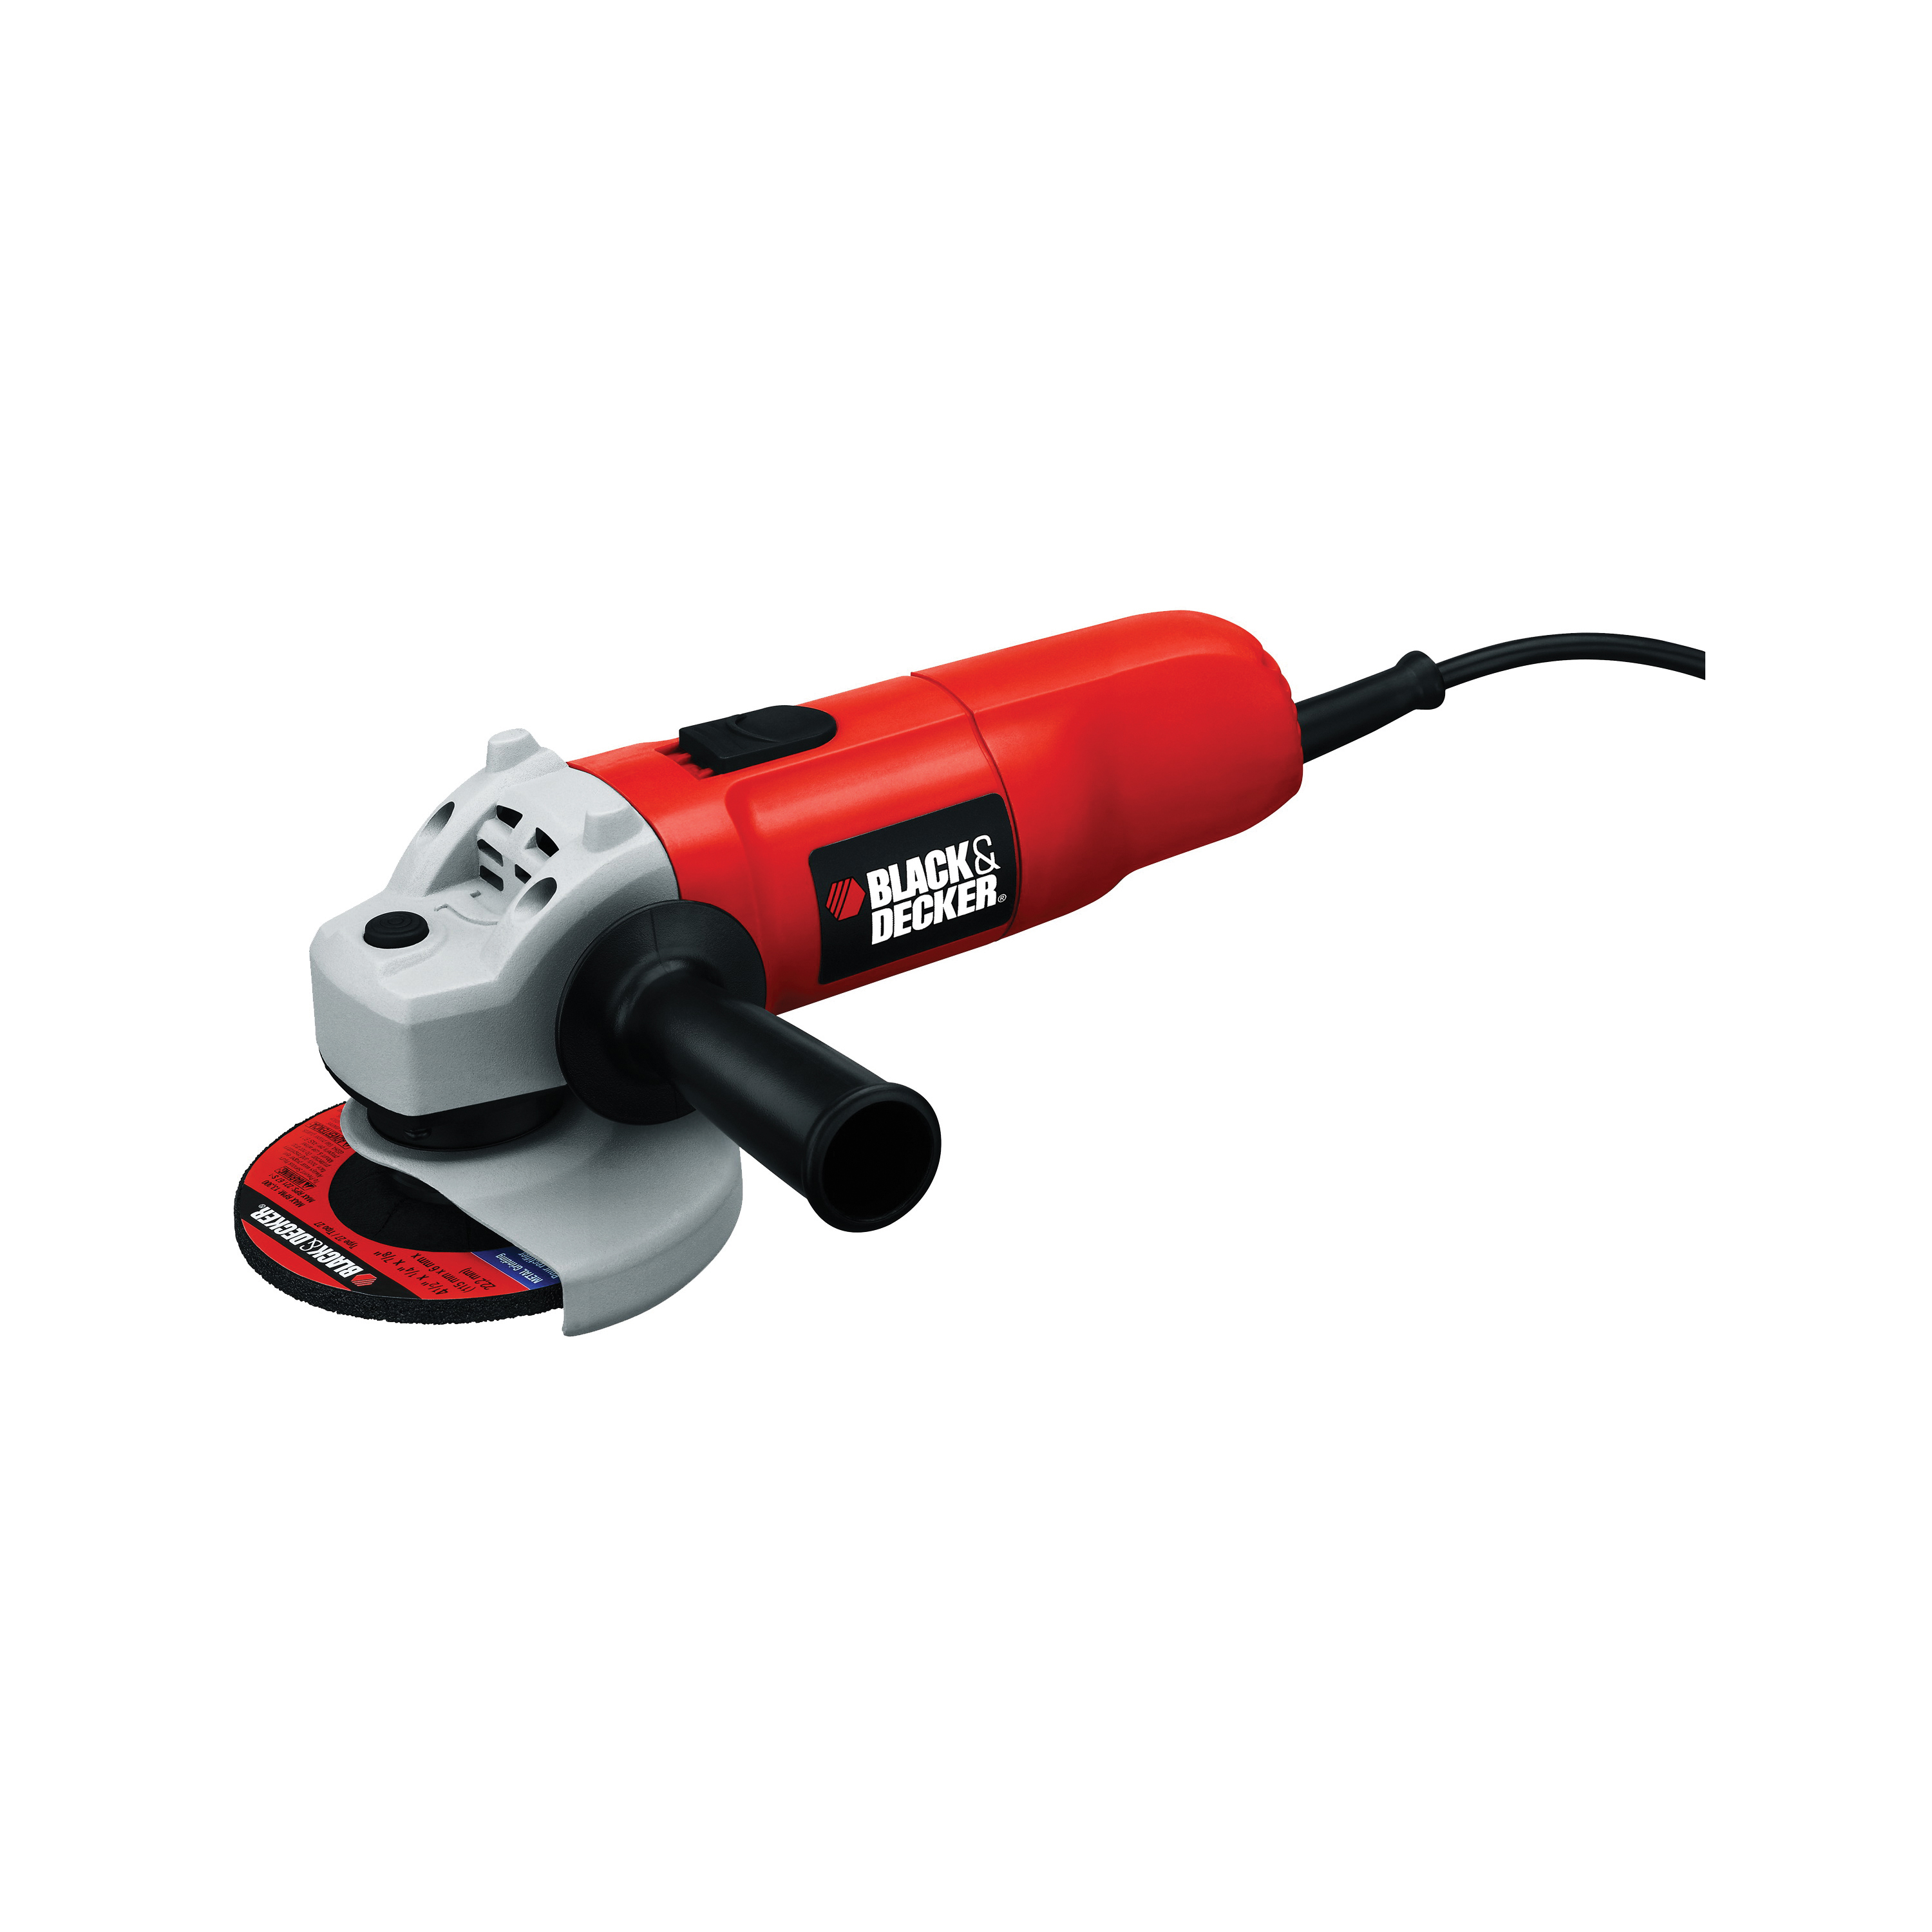 Black+Decker 7750 Angle Grinder, 5.5 A, 5/8-11 Spindle, 4-1/2 in Dia Wheel, 10,000 rpm Speed - 1